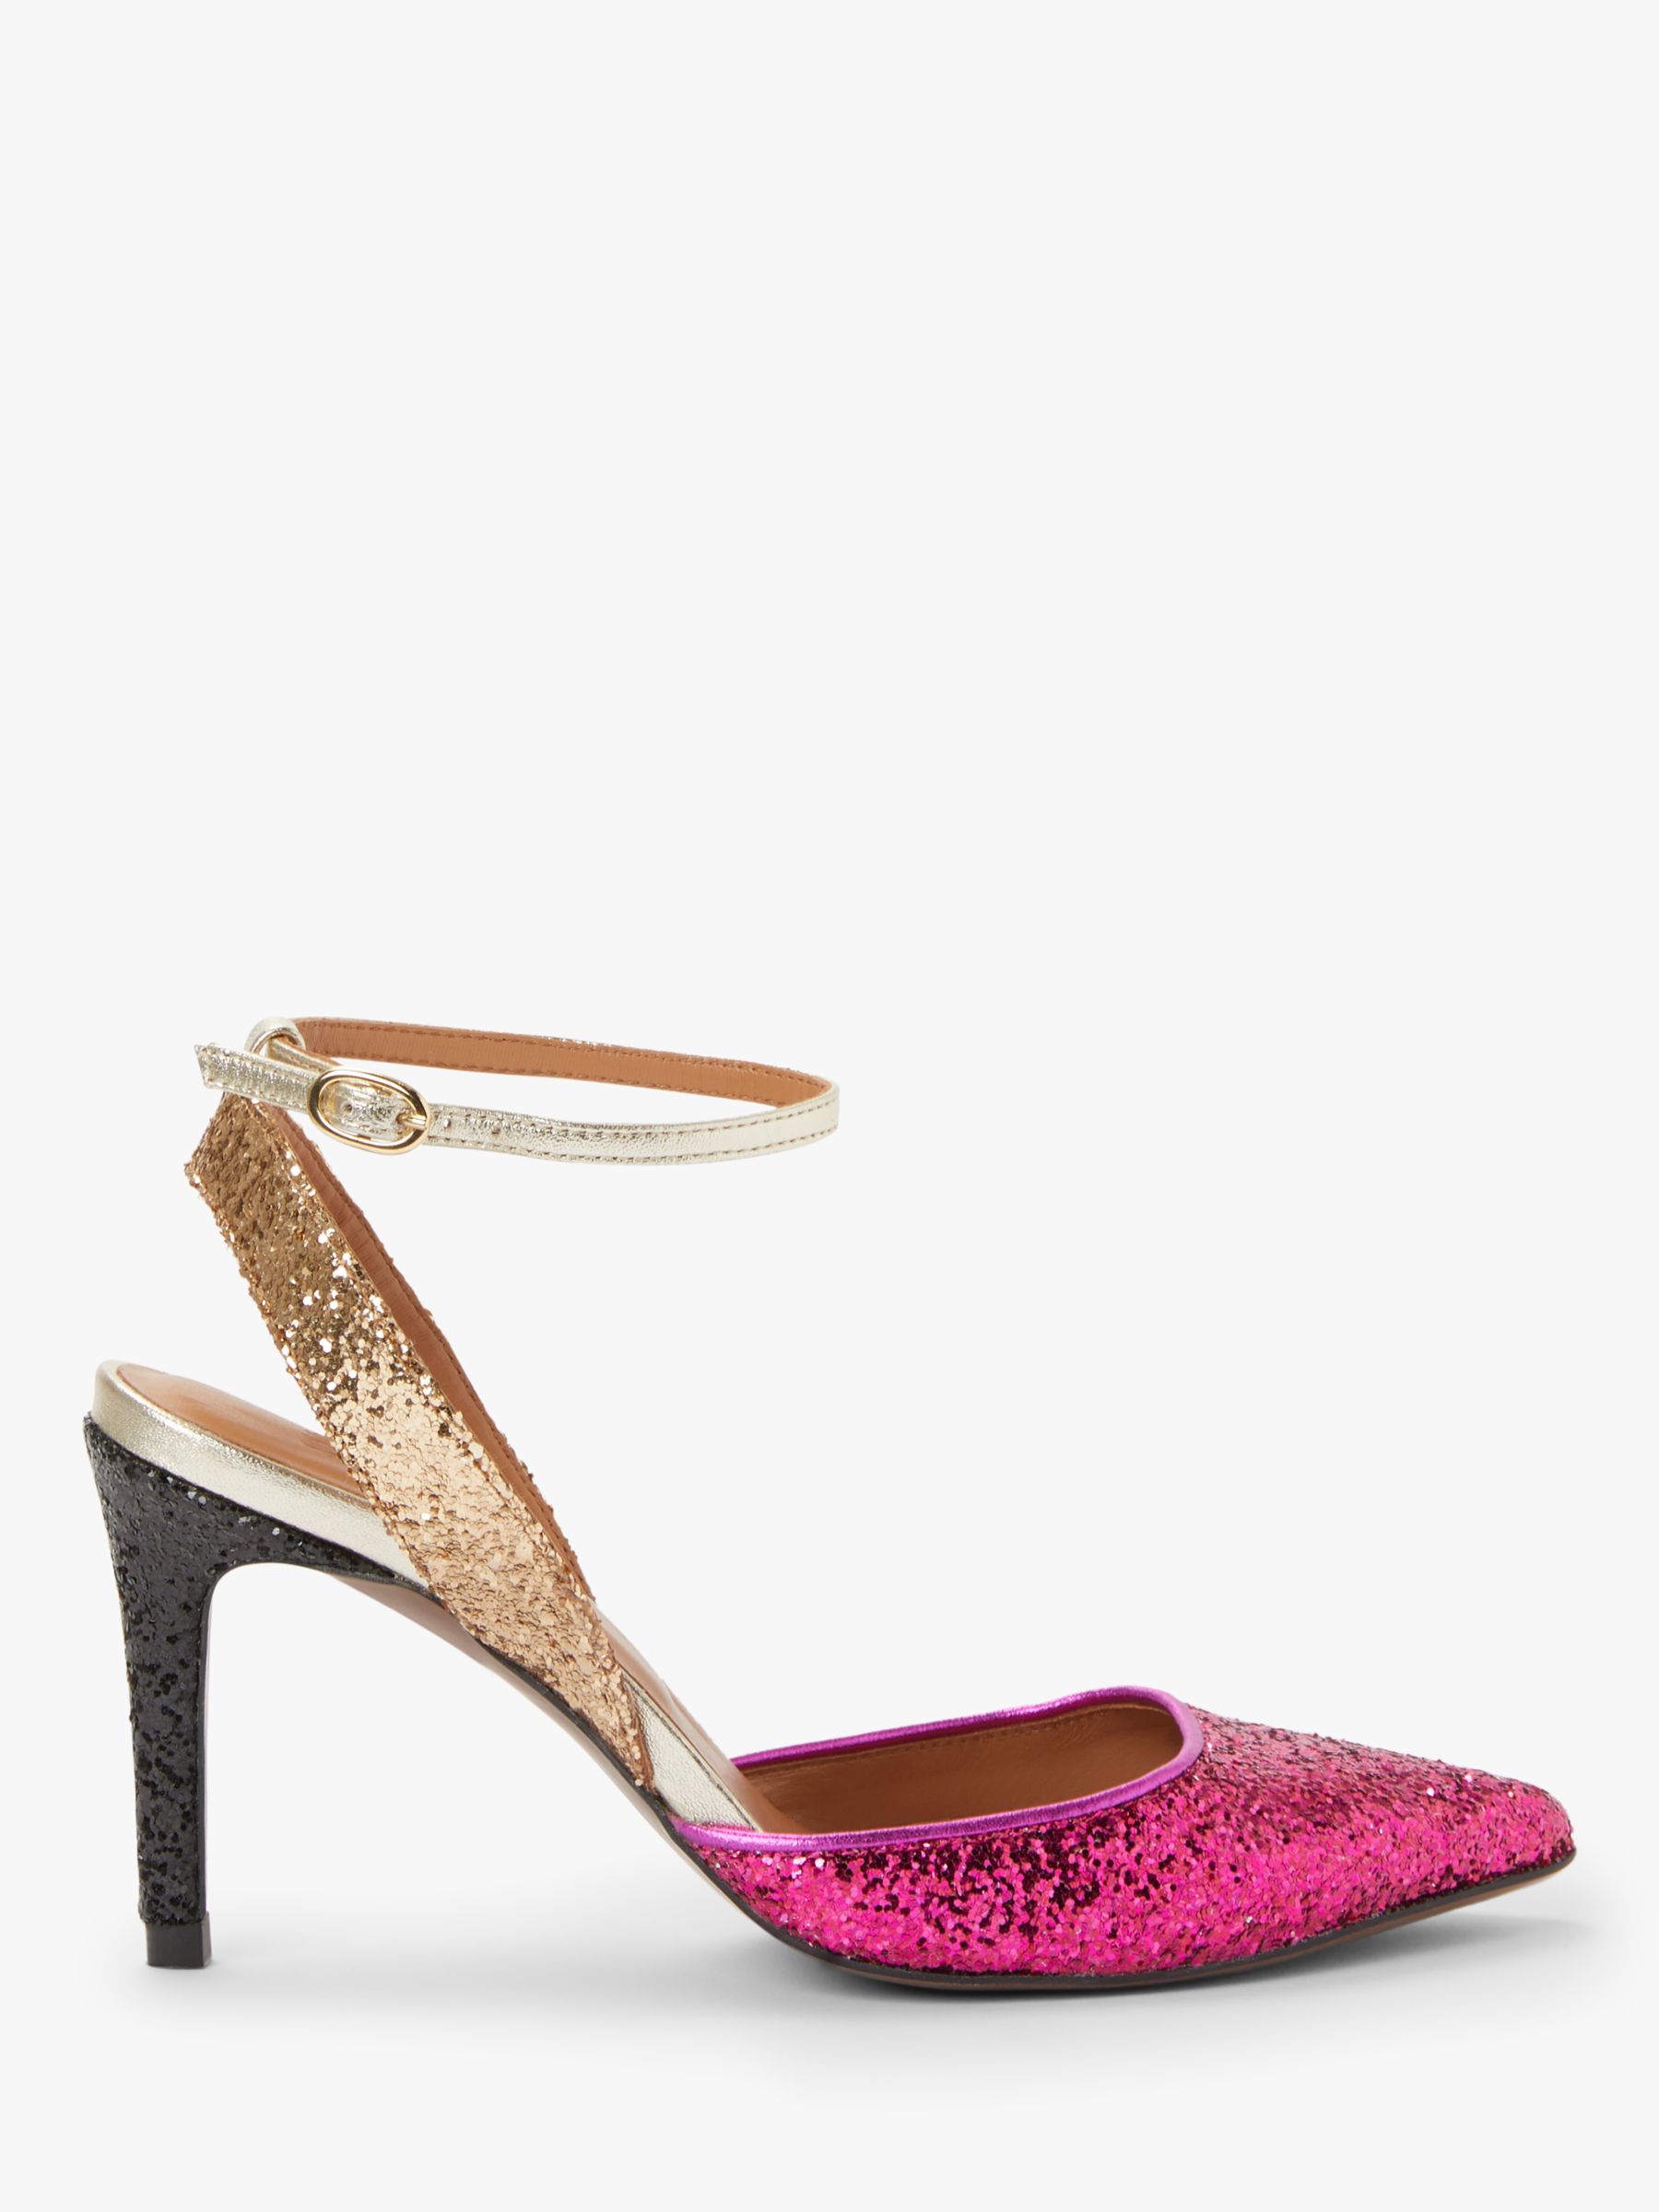 AND/OR Ailey Slingback Stiletto Heel Court Shoes, Pink/Gold Glitter